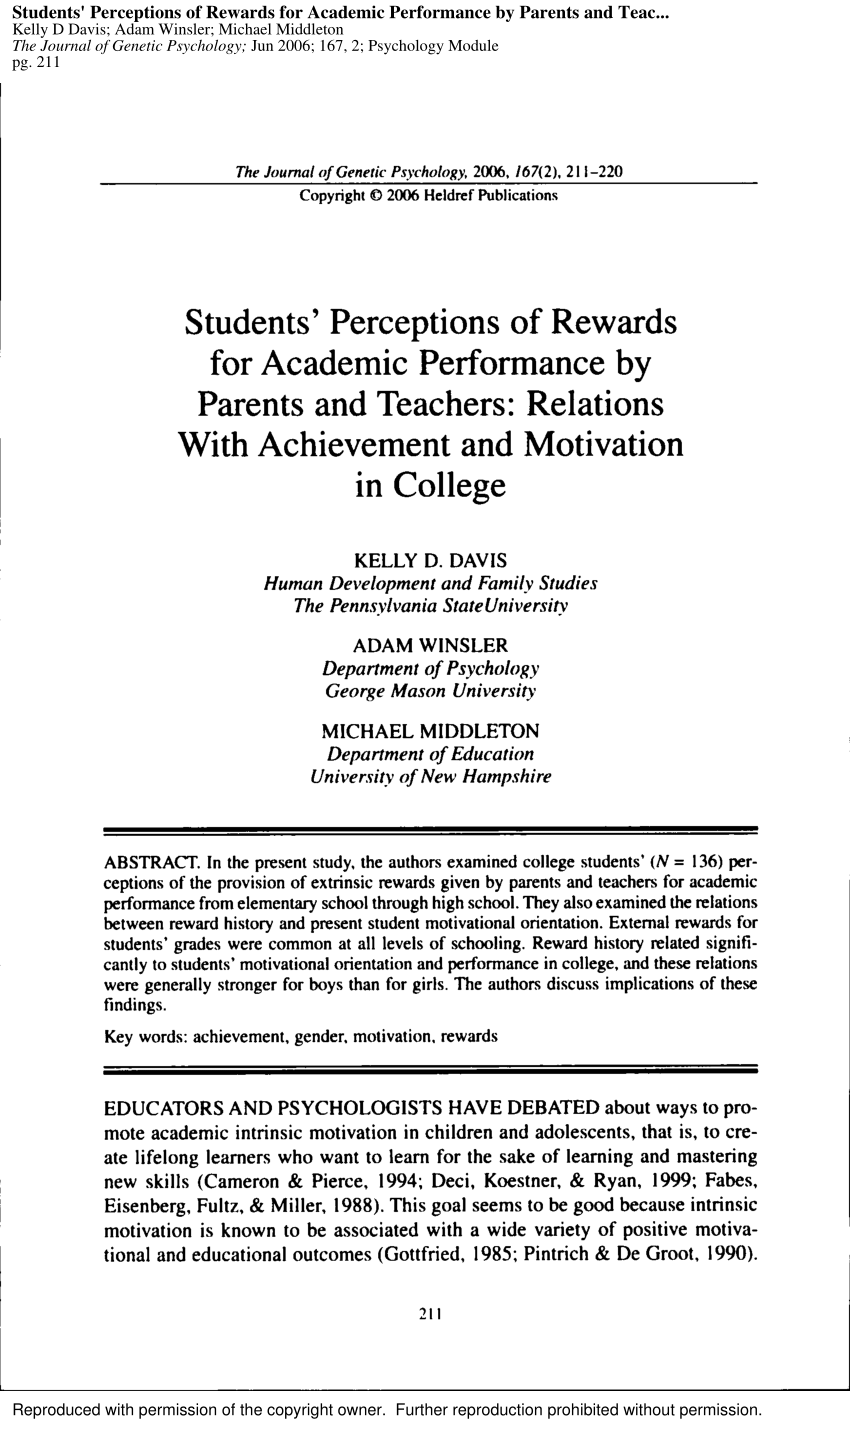 literature review on the impact of teacher motivation on academic performance of students